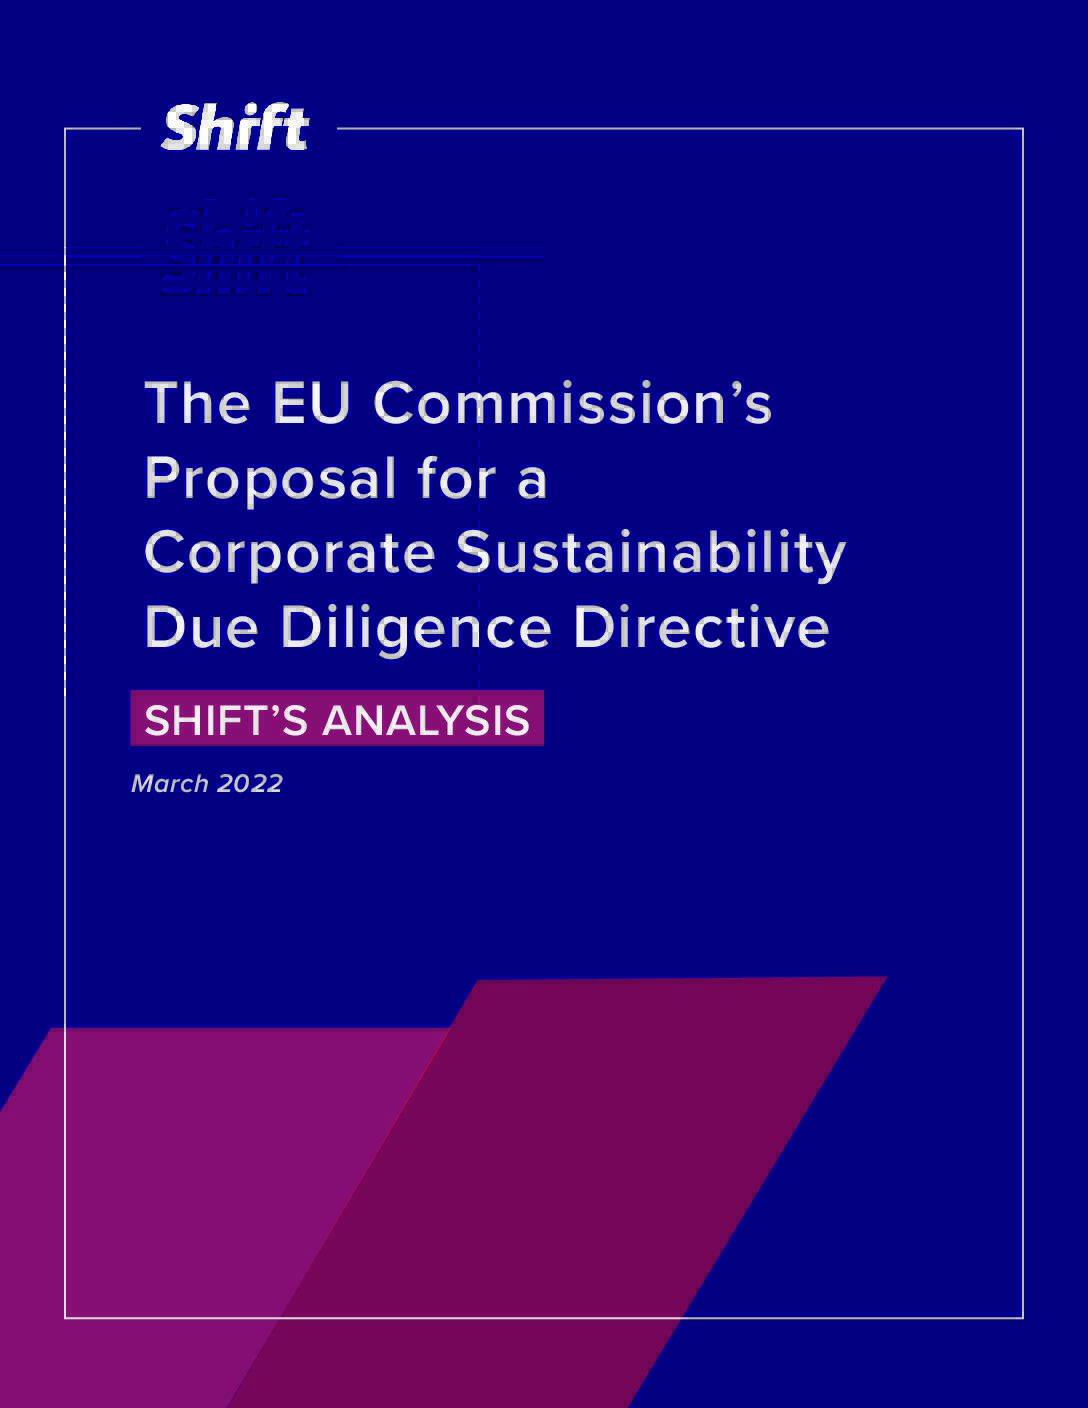 The EU Commission’s Proposal for a Corporate Sustainability Due Diligence Directive